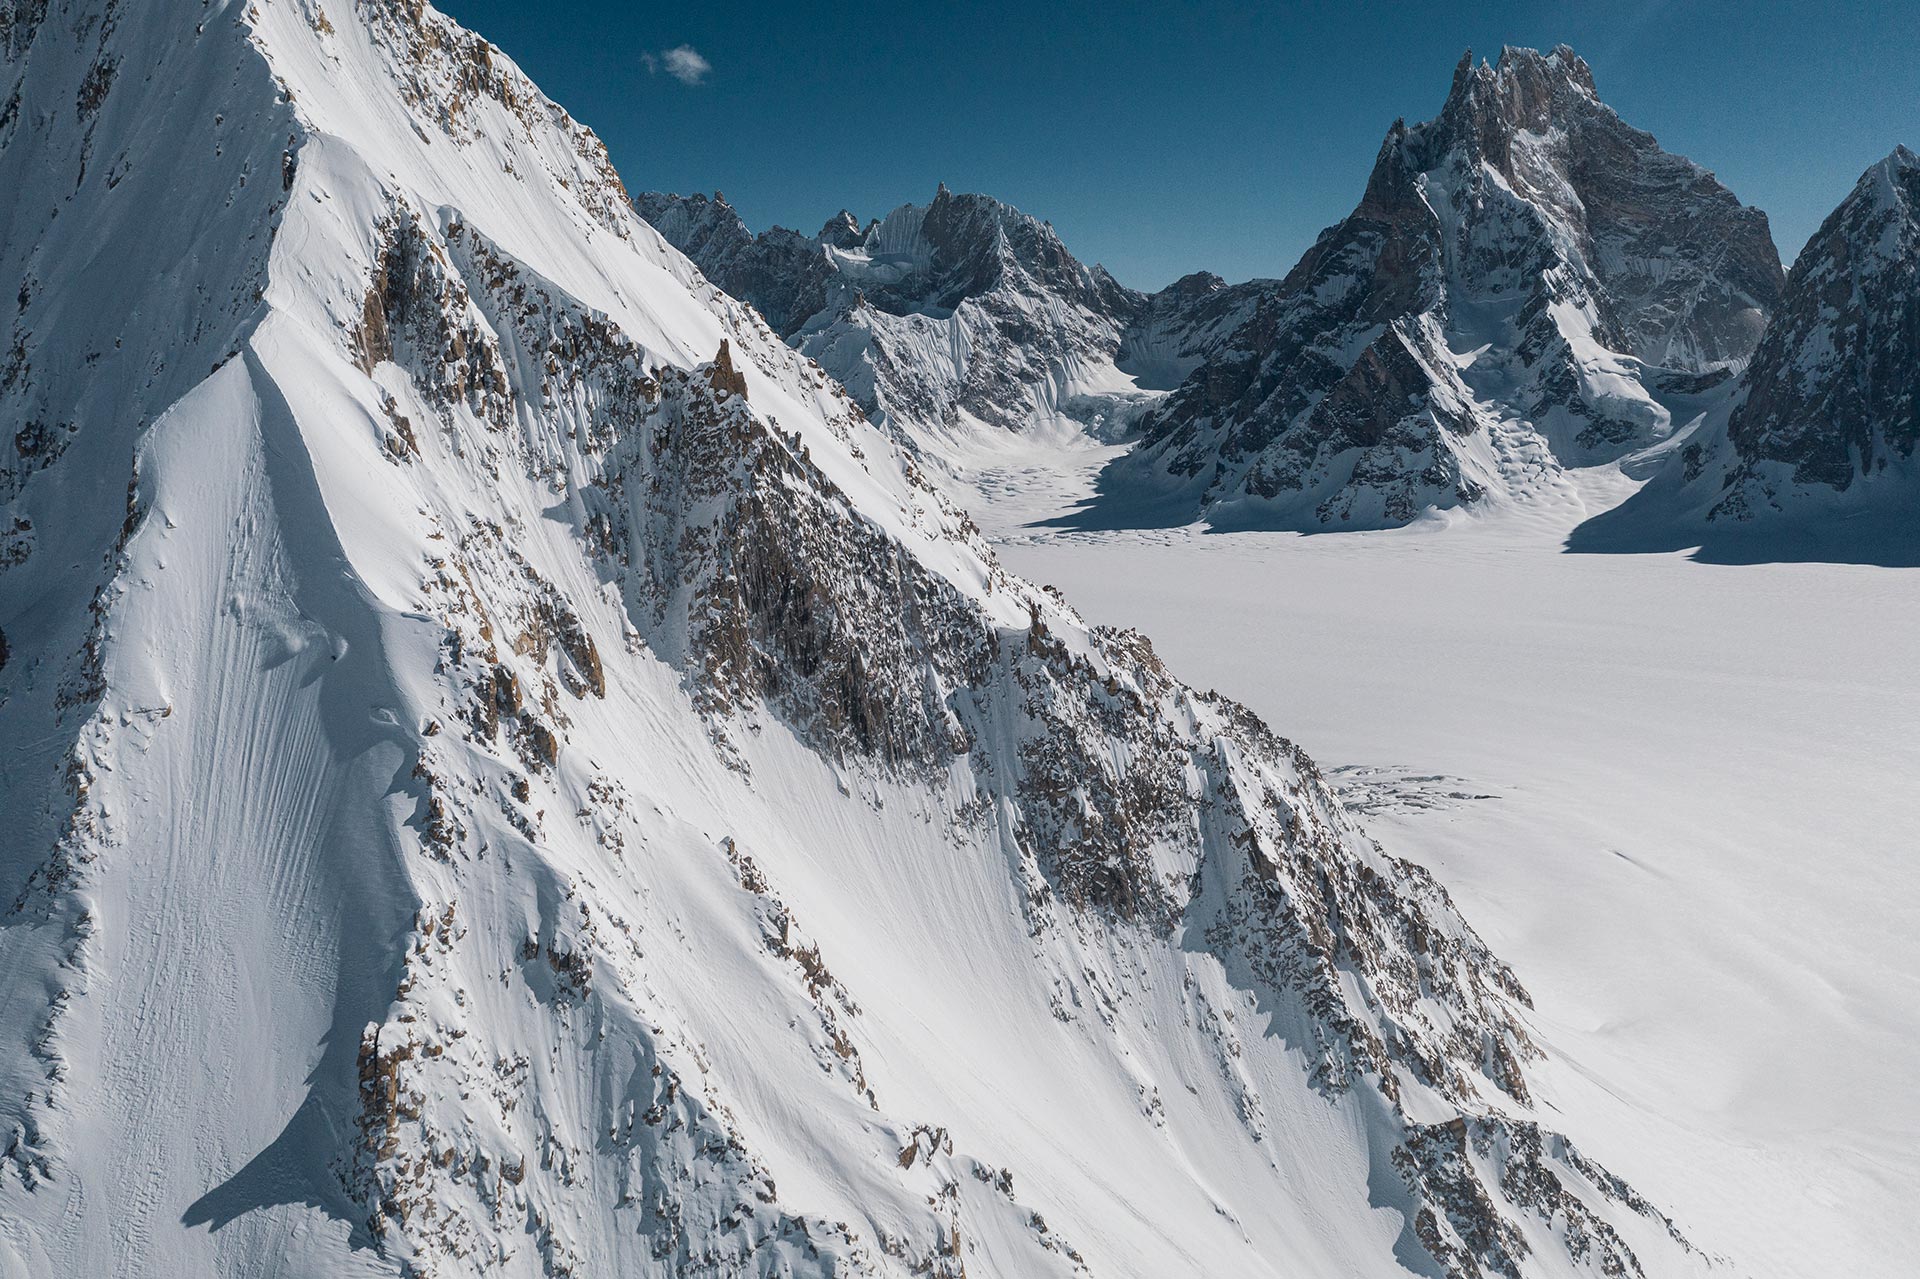 Jeremie Heitz skiing in Pakistan for La Liste: Everything or Nothing